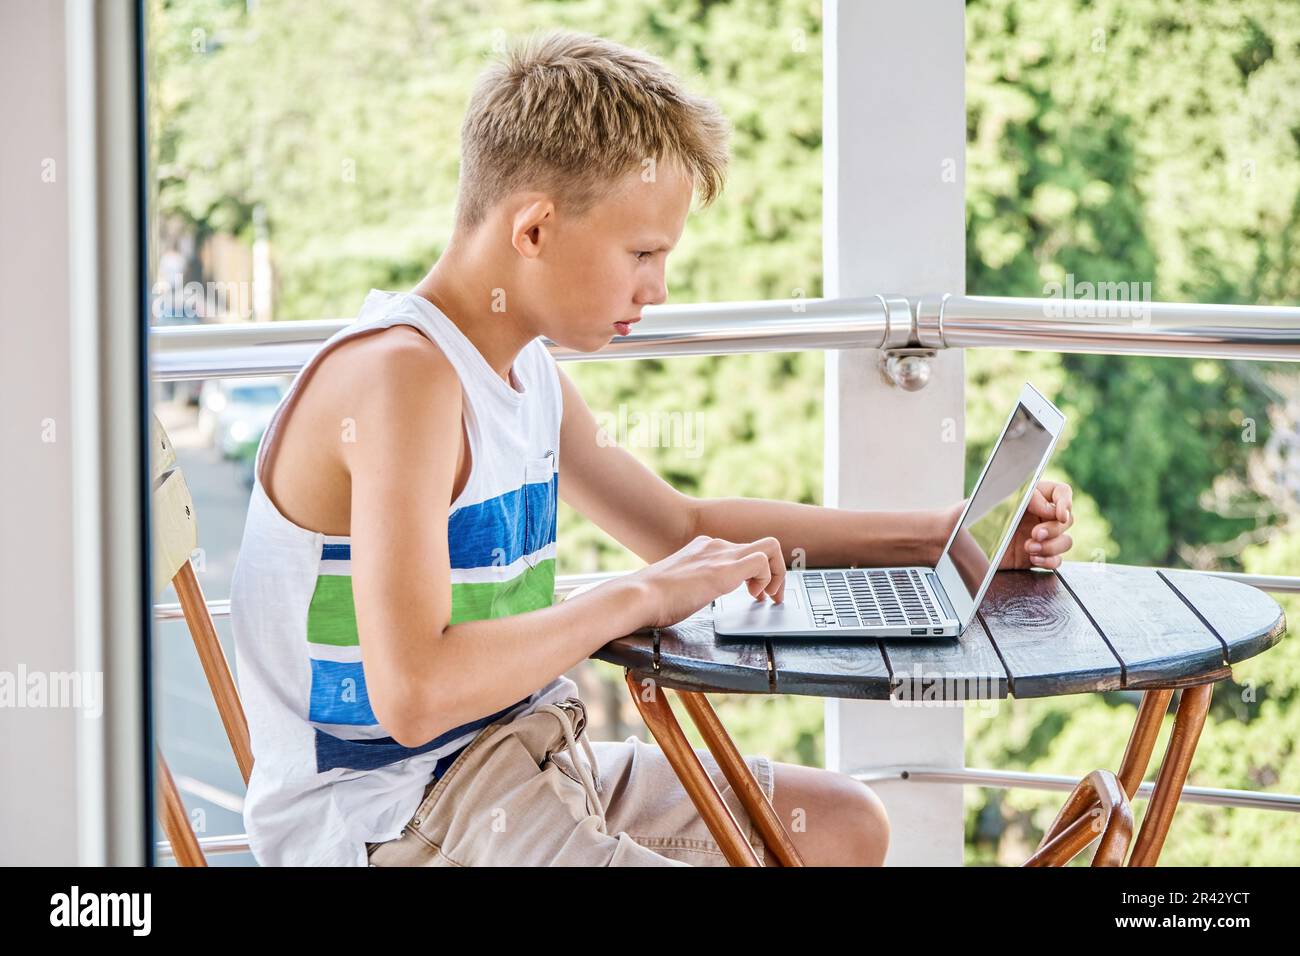 Preteen boy sitting on hotel balcony and surfing the internet on grey laptop. Schoolboy enjoys spending summer holidays and playing games Stock Photo